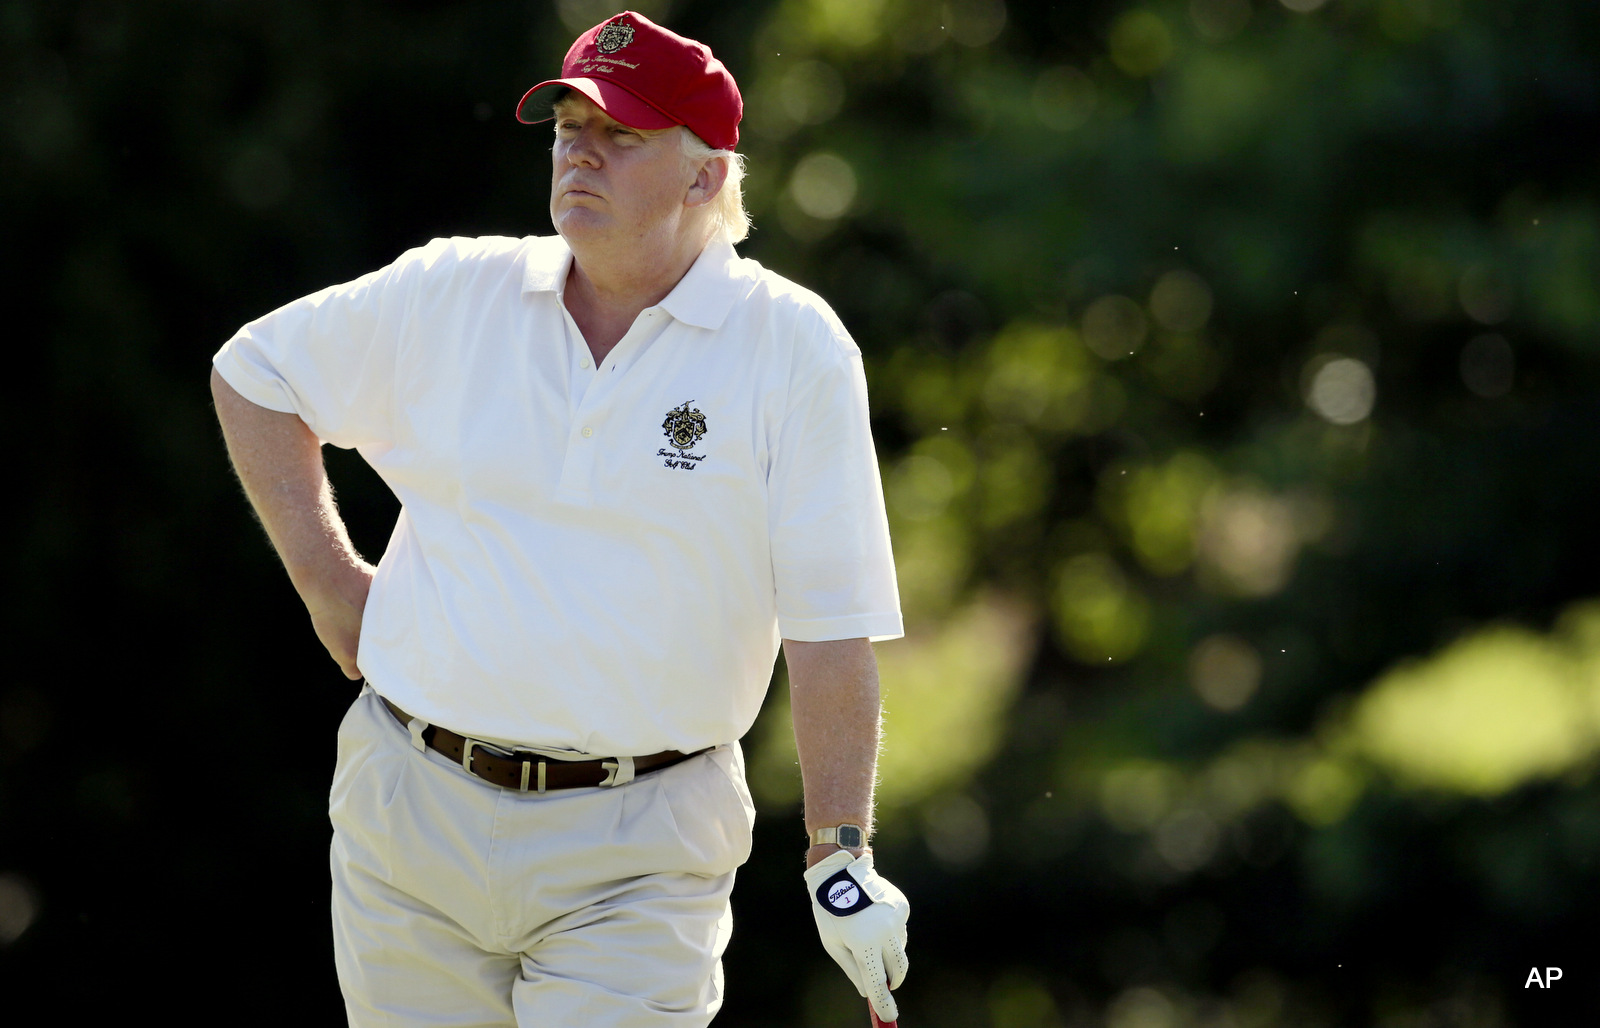 Donald Trump stands on the 14th fairway during a pro-am round of the AT&T National golf tournament at Congressional Country Club in Bethesda, Md.